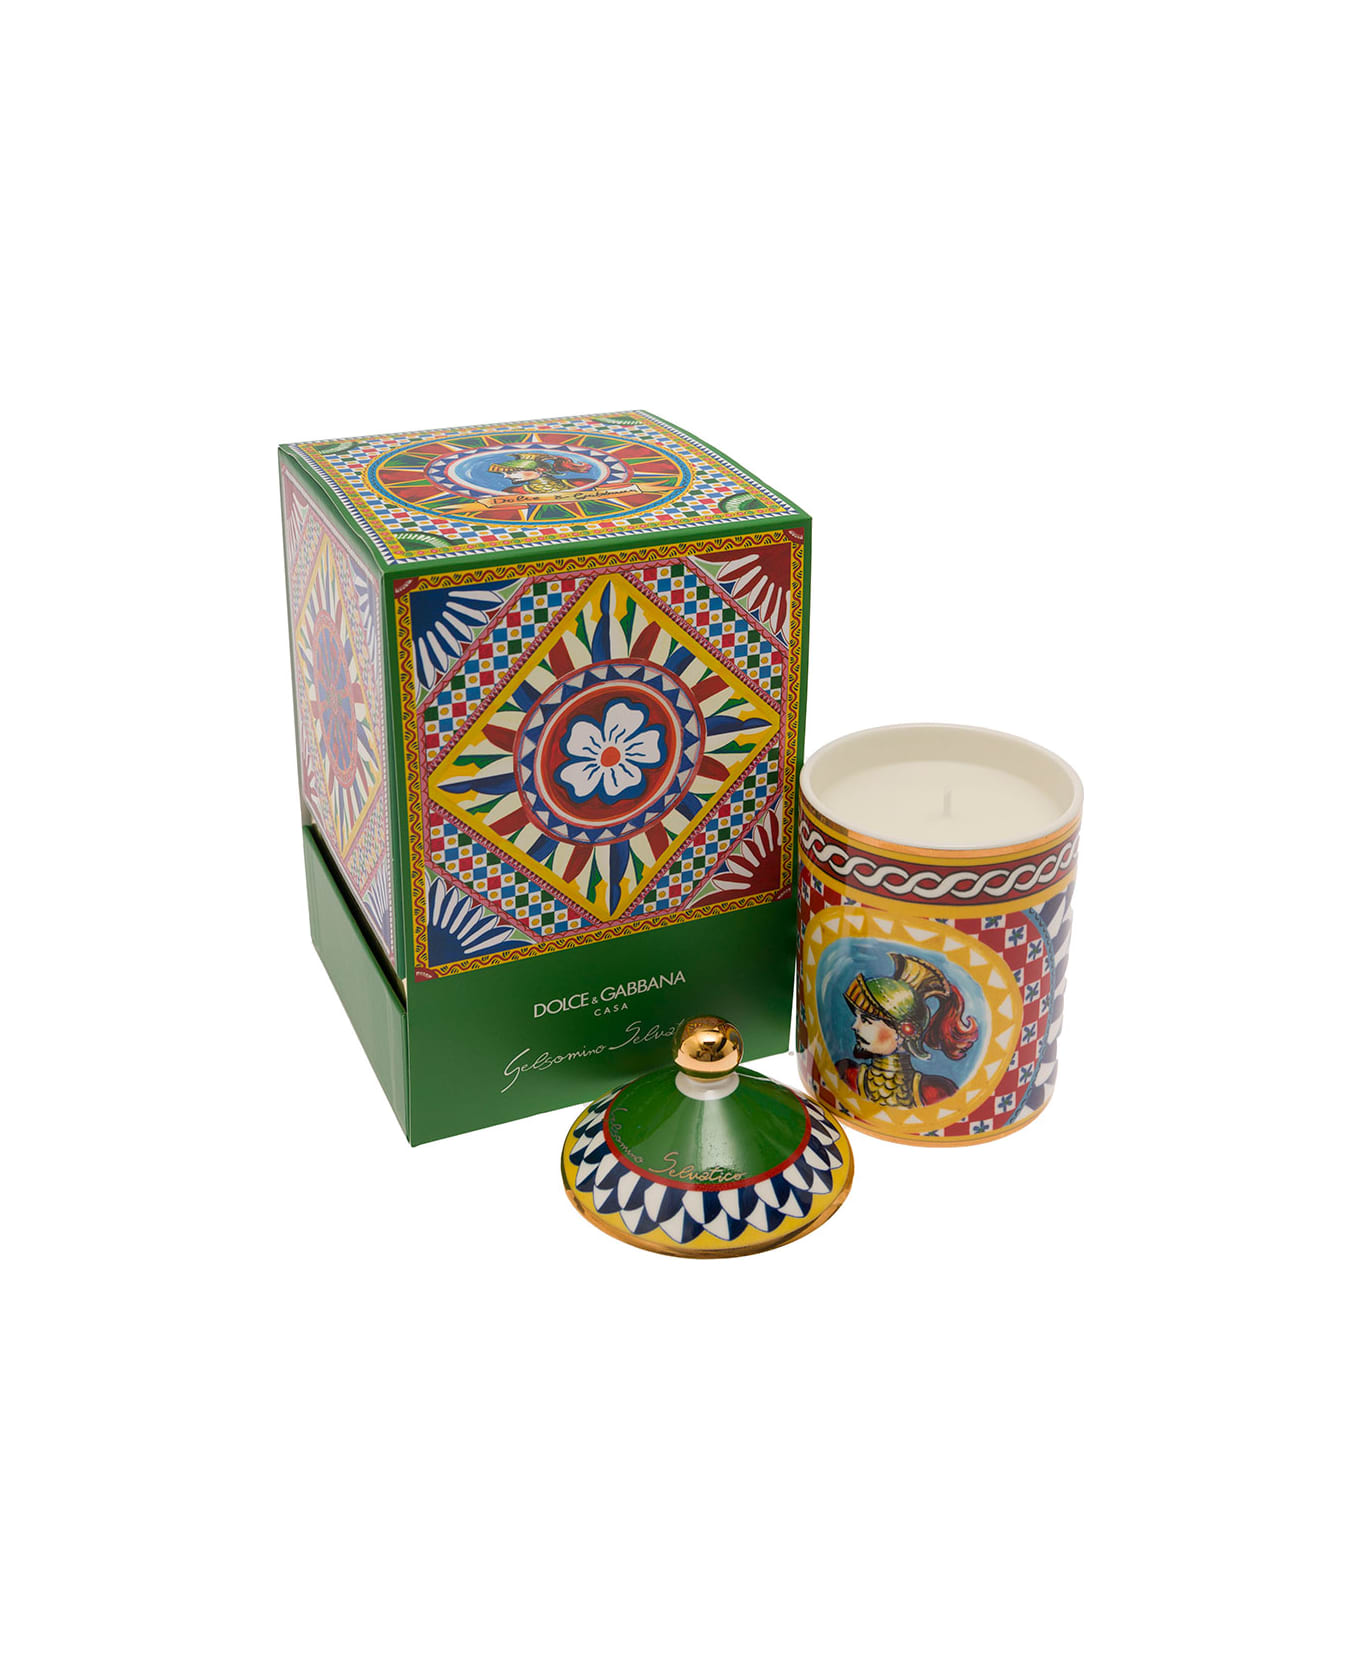 Dolce & Gabbana Wild Jasmine Scented Candle With Lid And Carretto Print - Multicolor インテリア雑貨